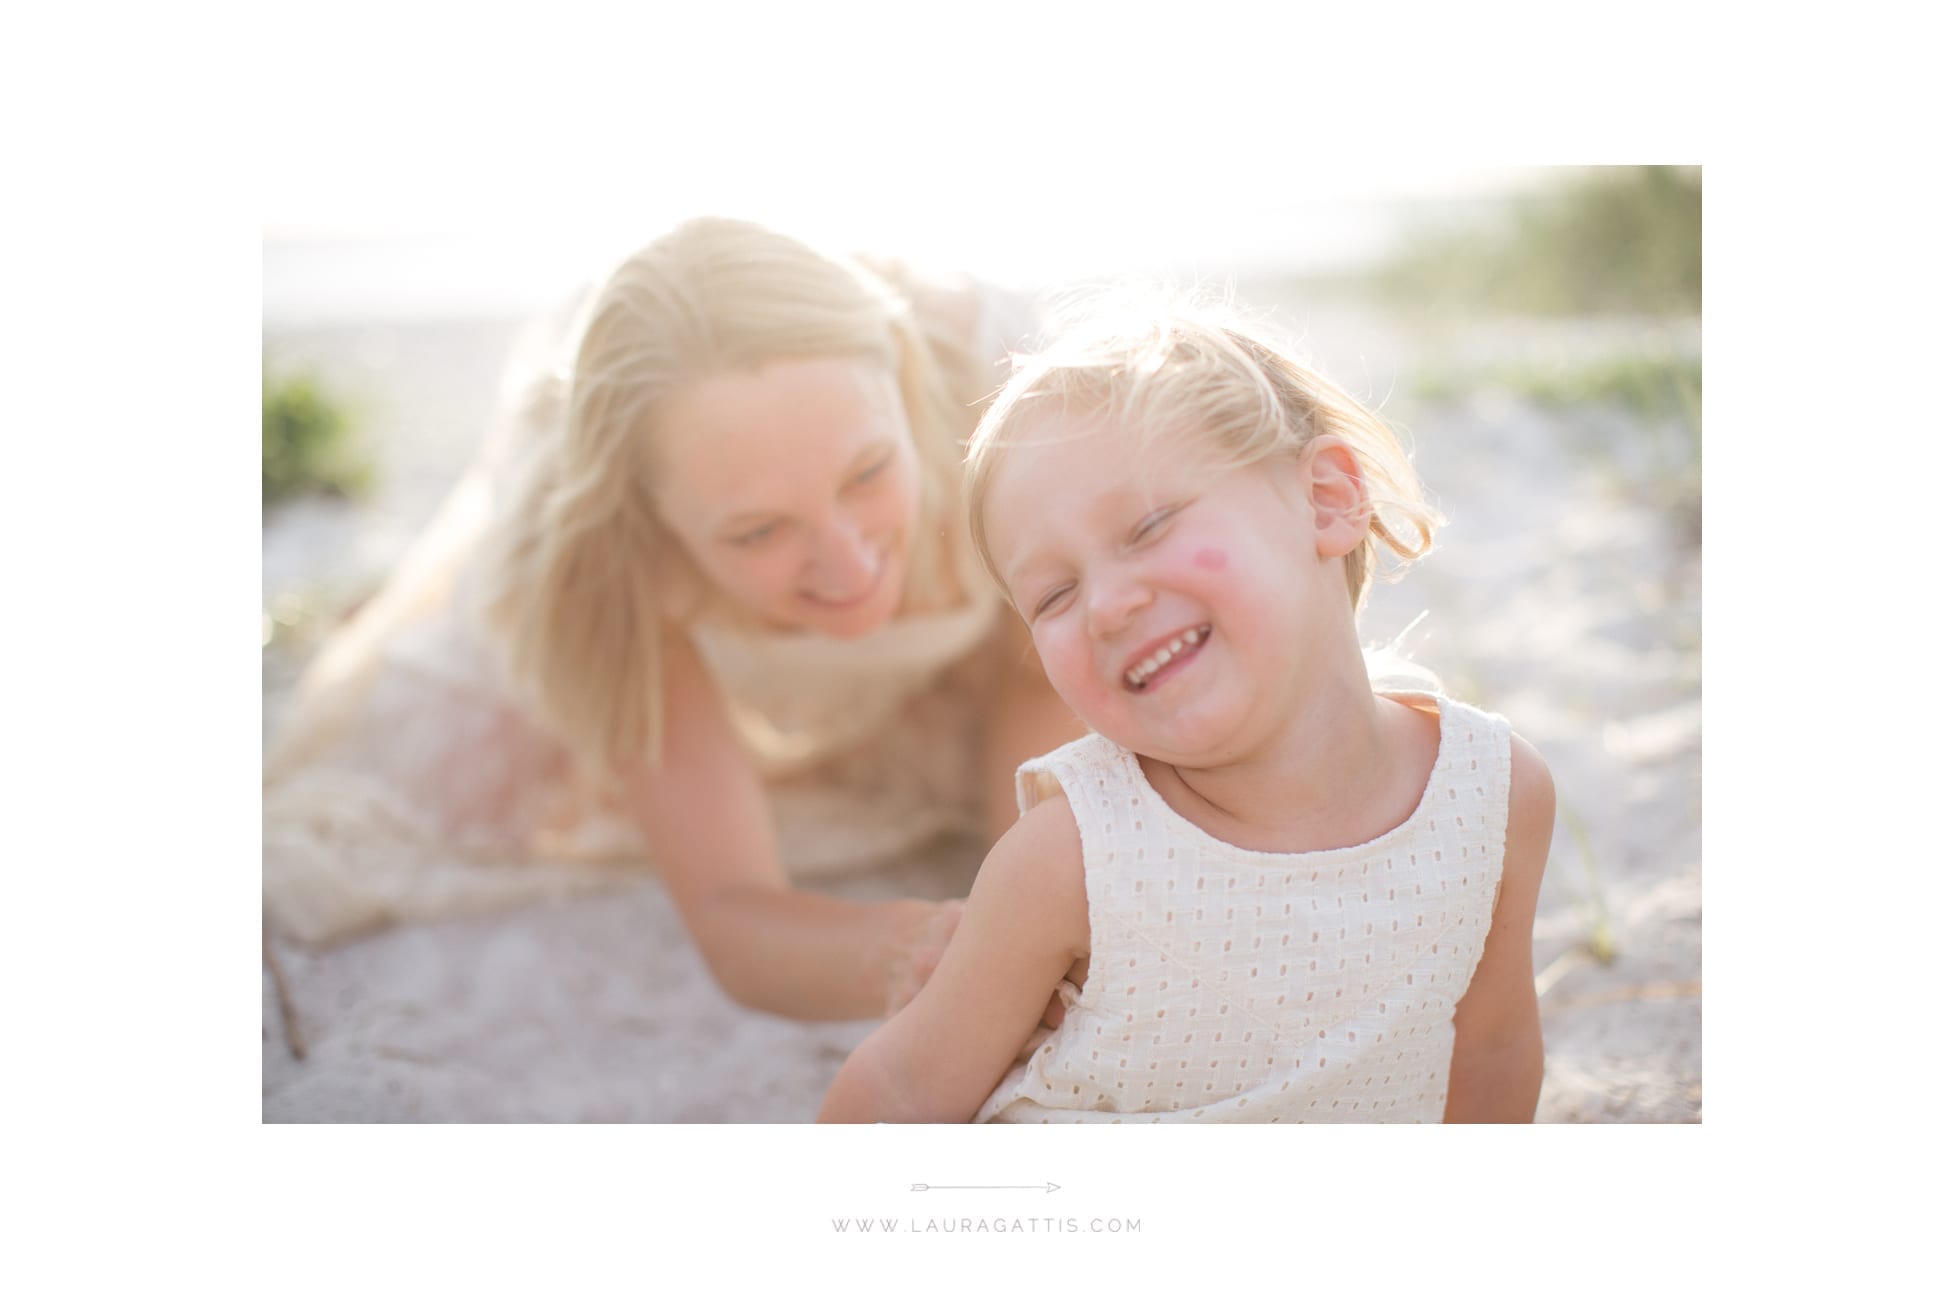 natural light maternity and mother & child beach session | laura gattis photography